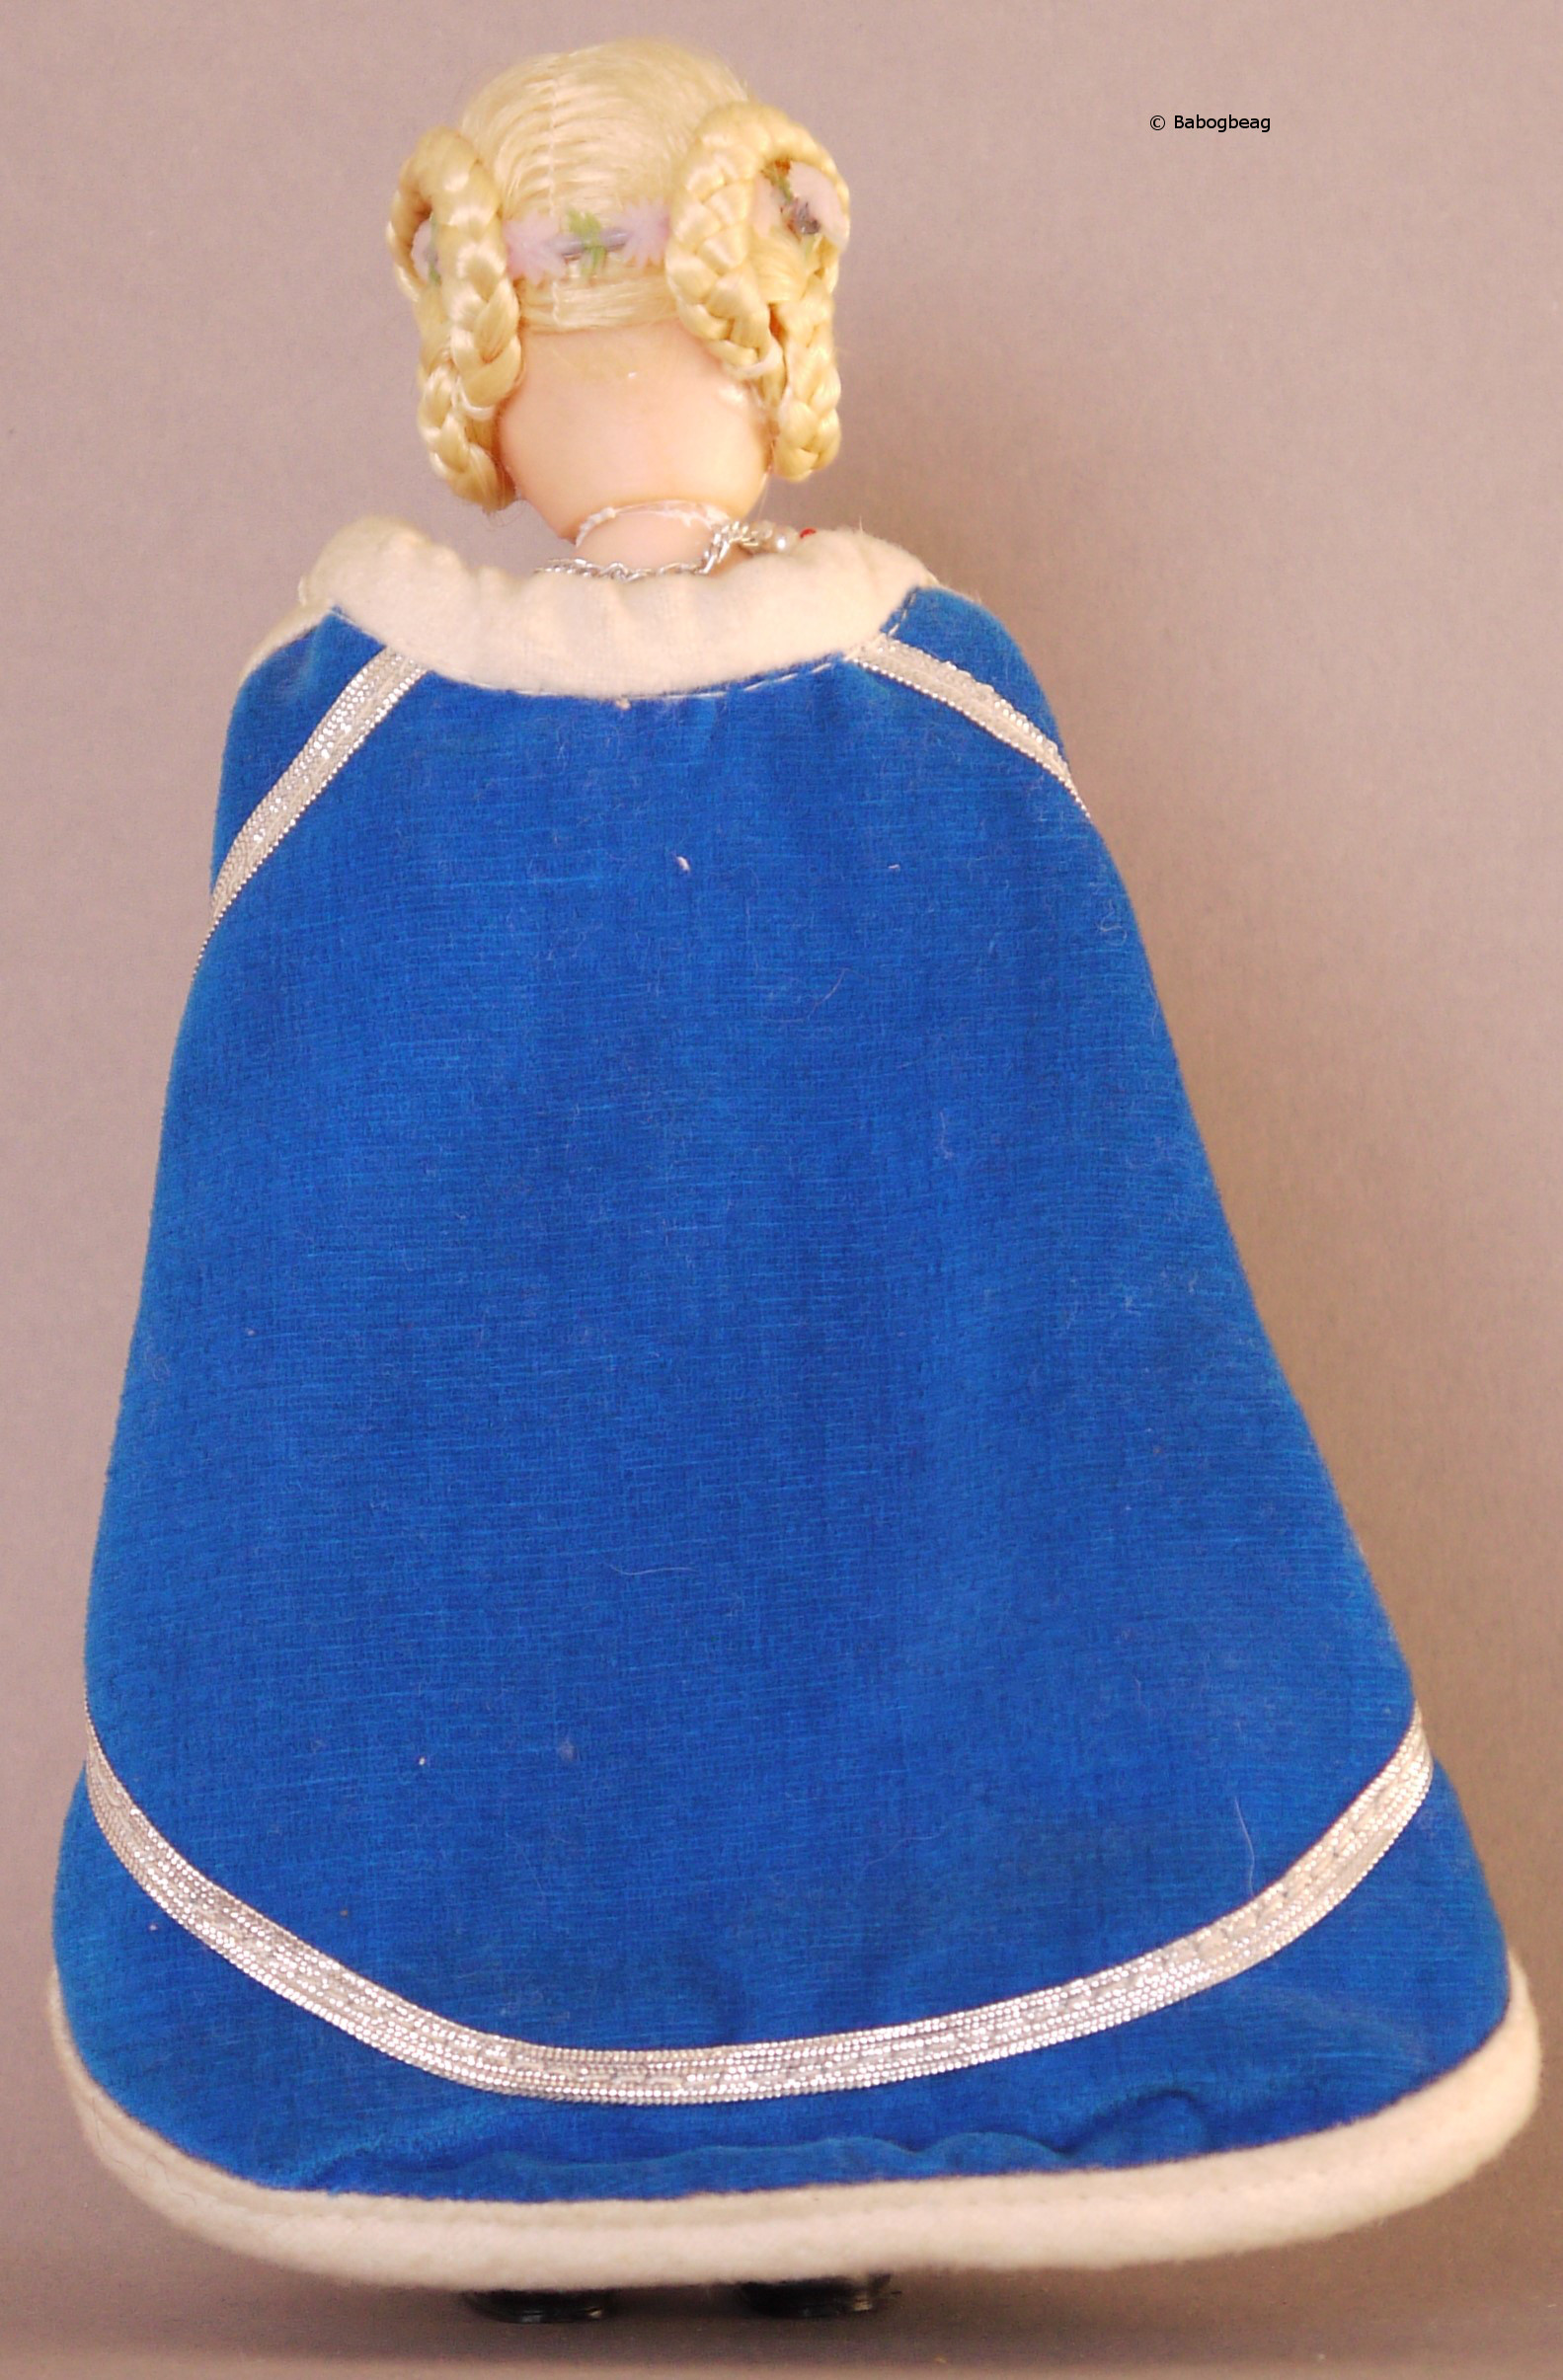 France: Isabella, Queen of France 1370—1435 – National costume dolls